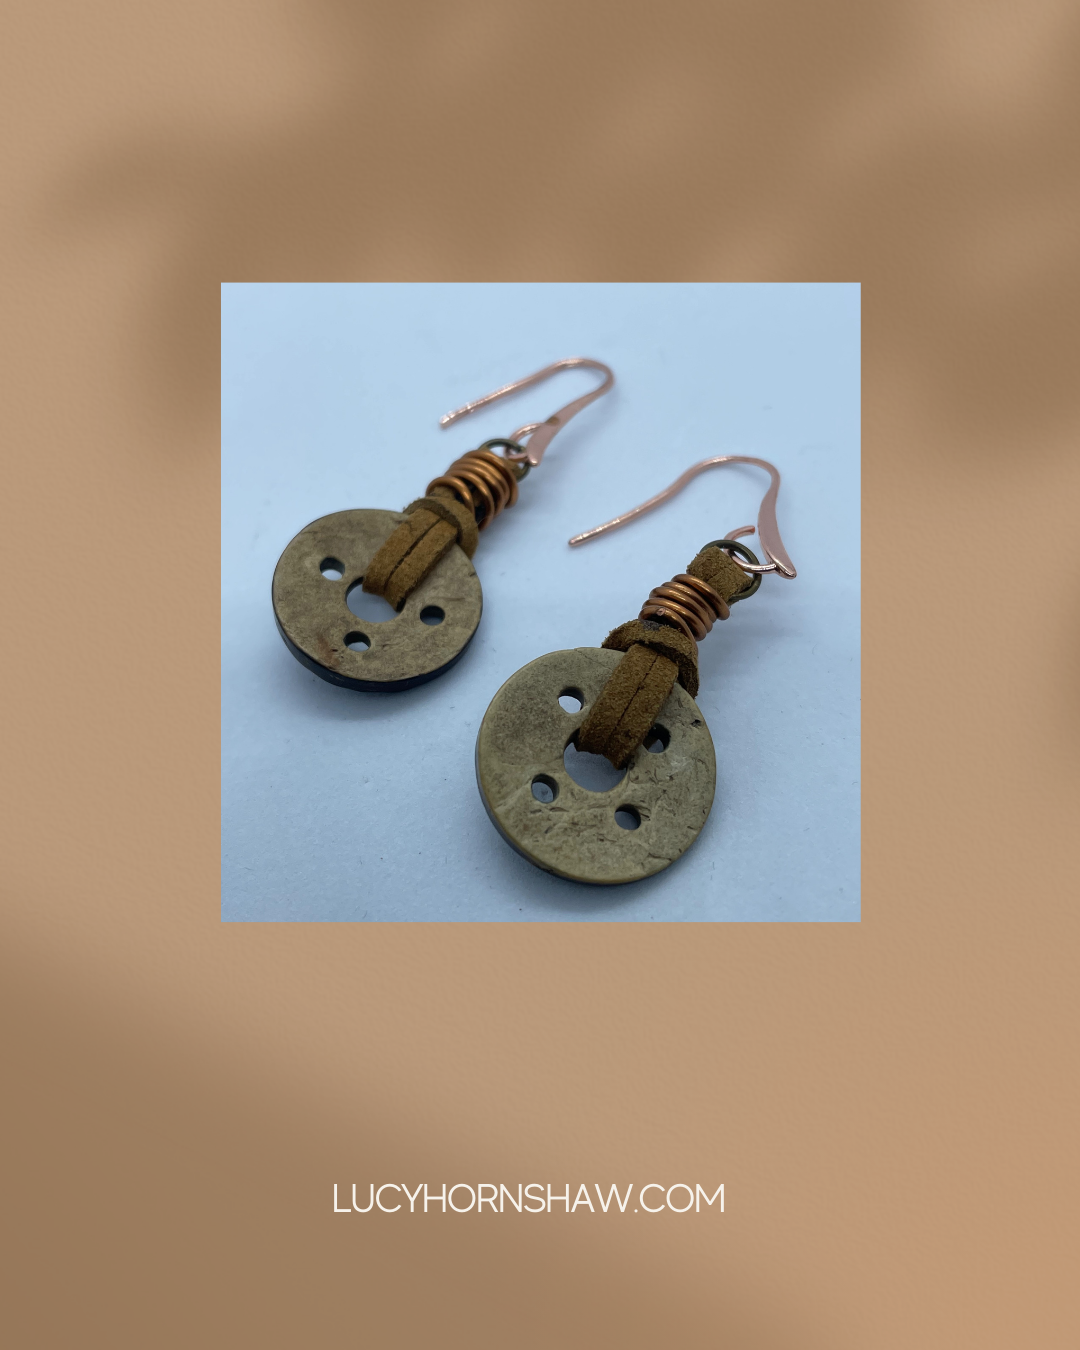 Brown leather cord earrings with bead